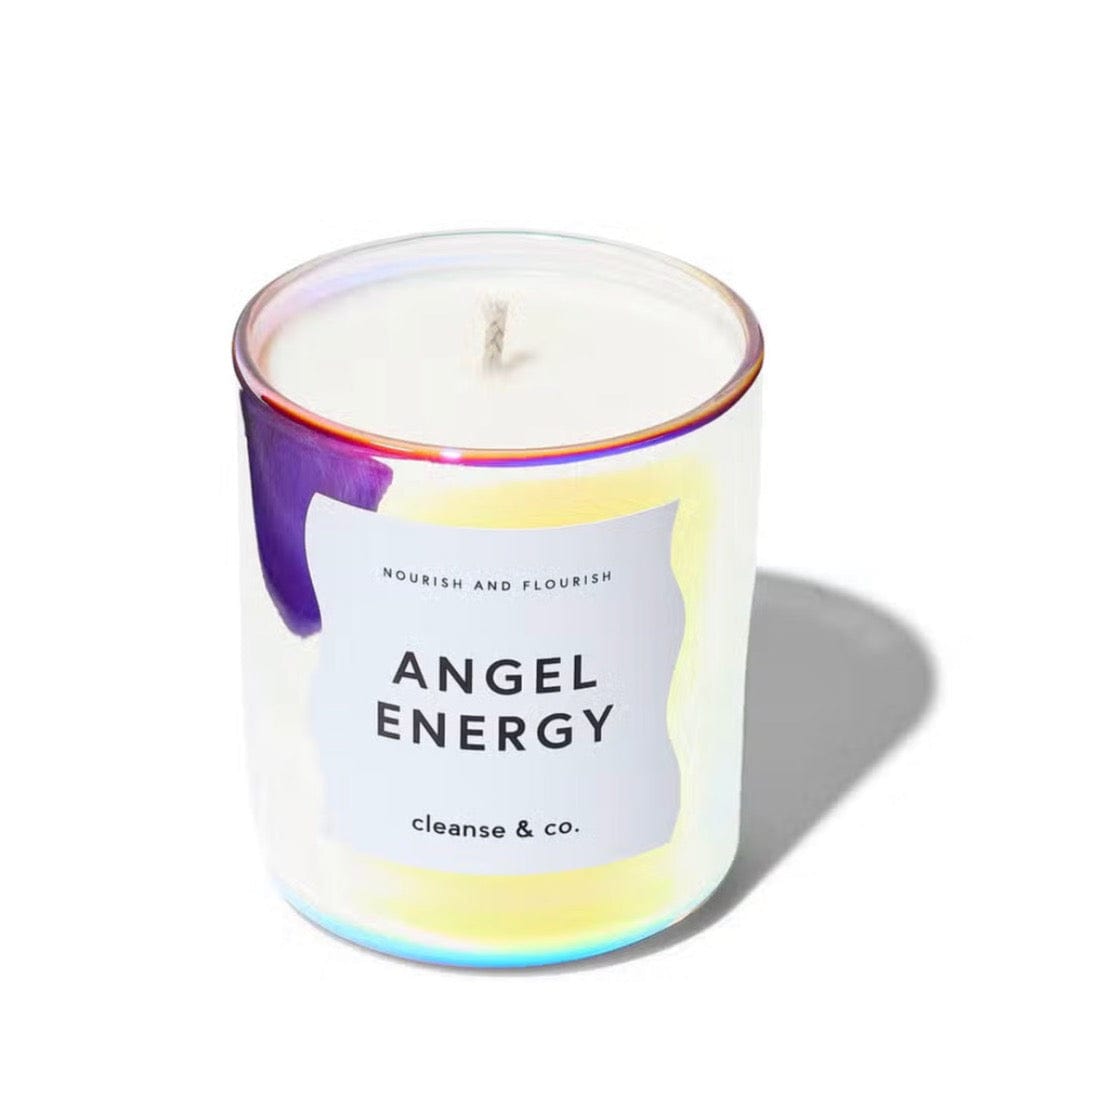 Angel Energy Limited Edition Candle - Nourish & Flourish 200G / Marine Moss and Melon by Cleanse & Co.